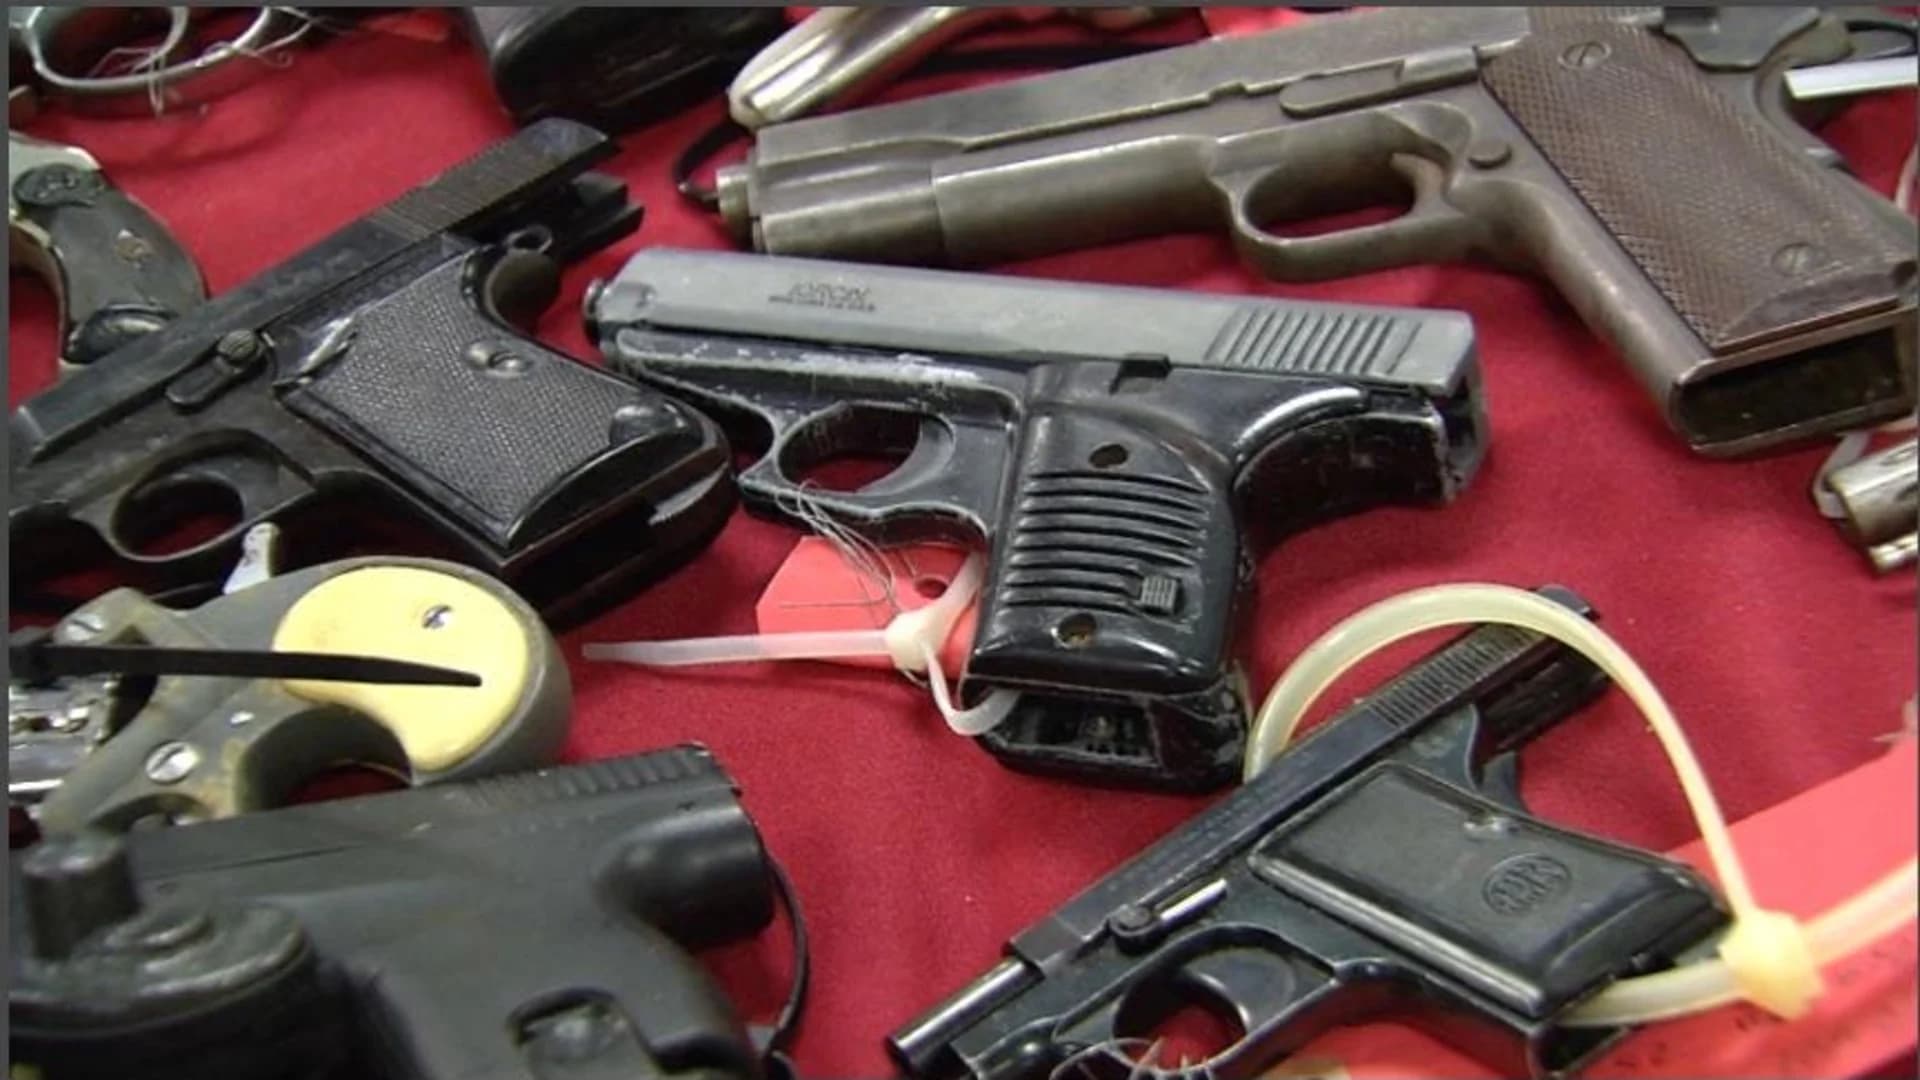 Gun manufacturer names to be added to list of gun violence stats